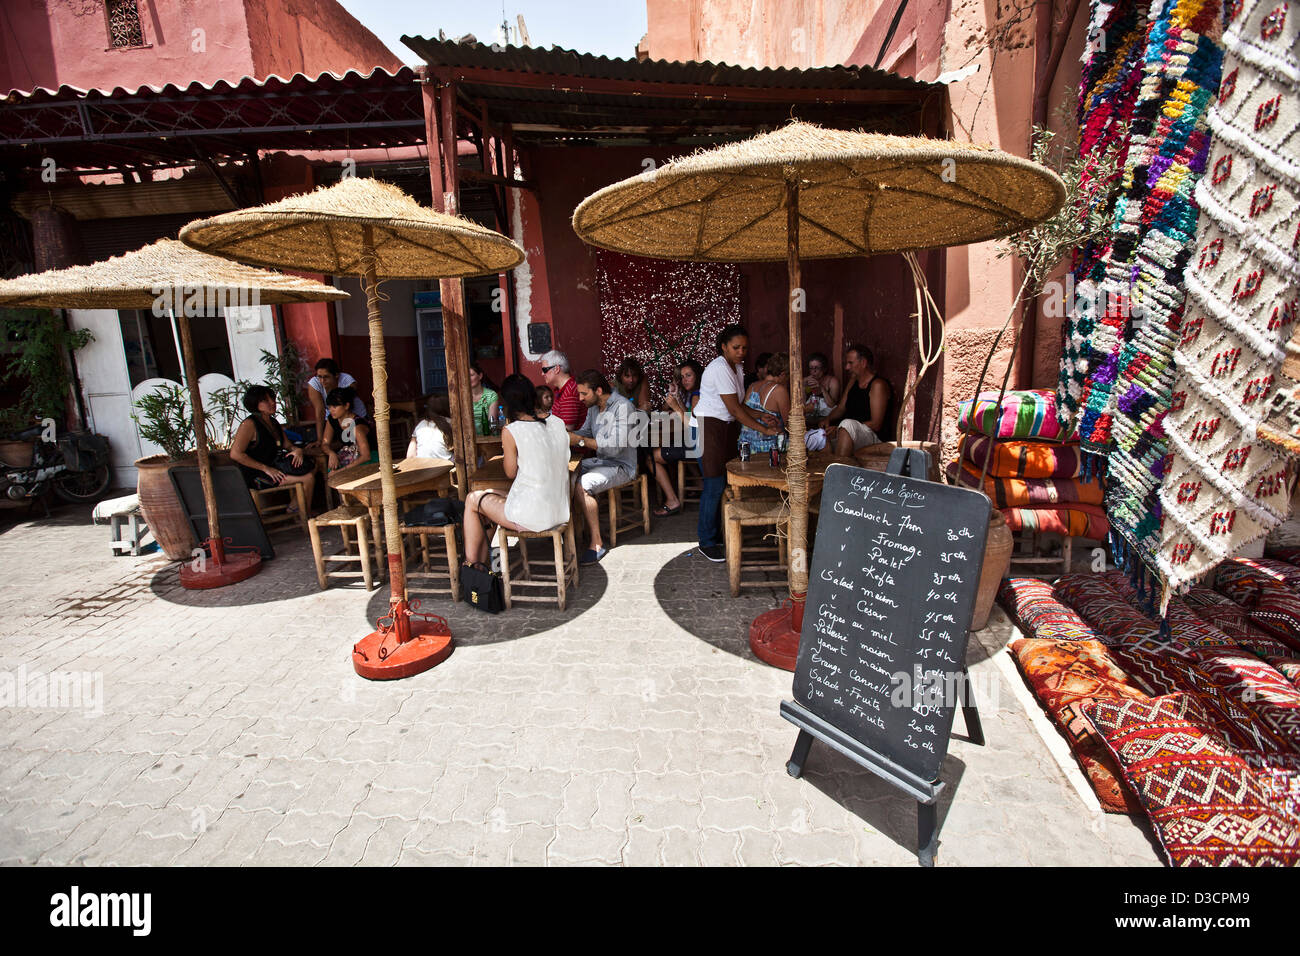 Tourists in cafe, Marrakech, Morocco Stock Photo